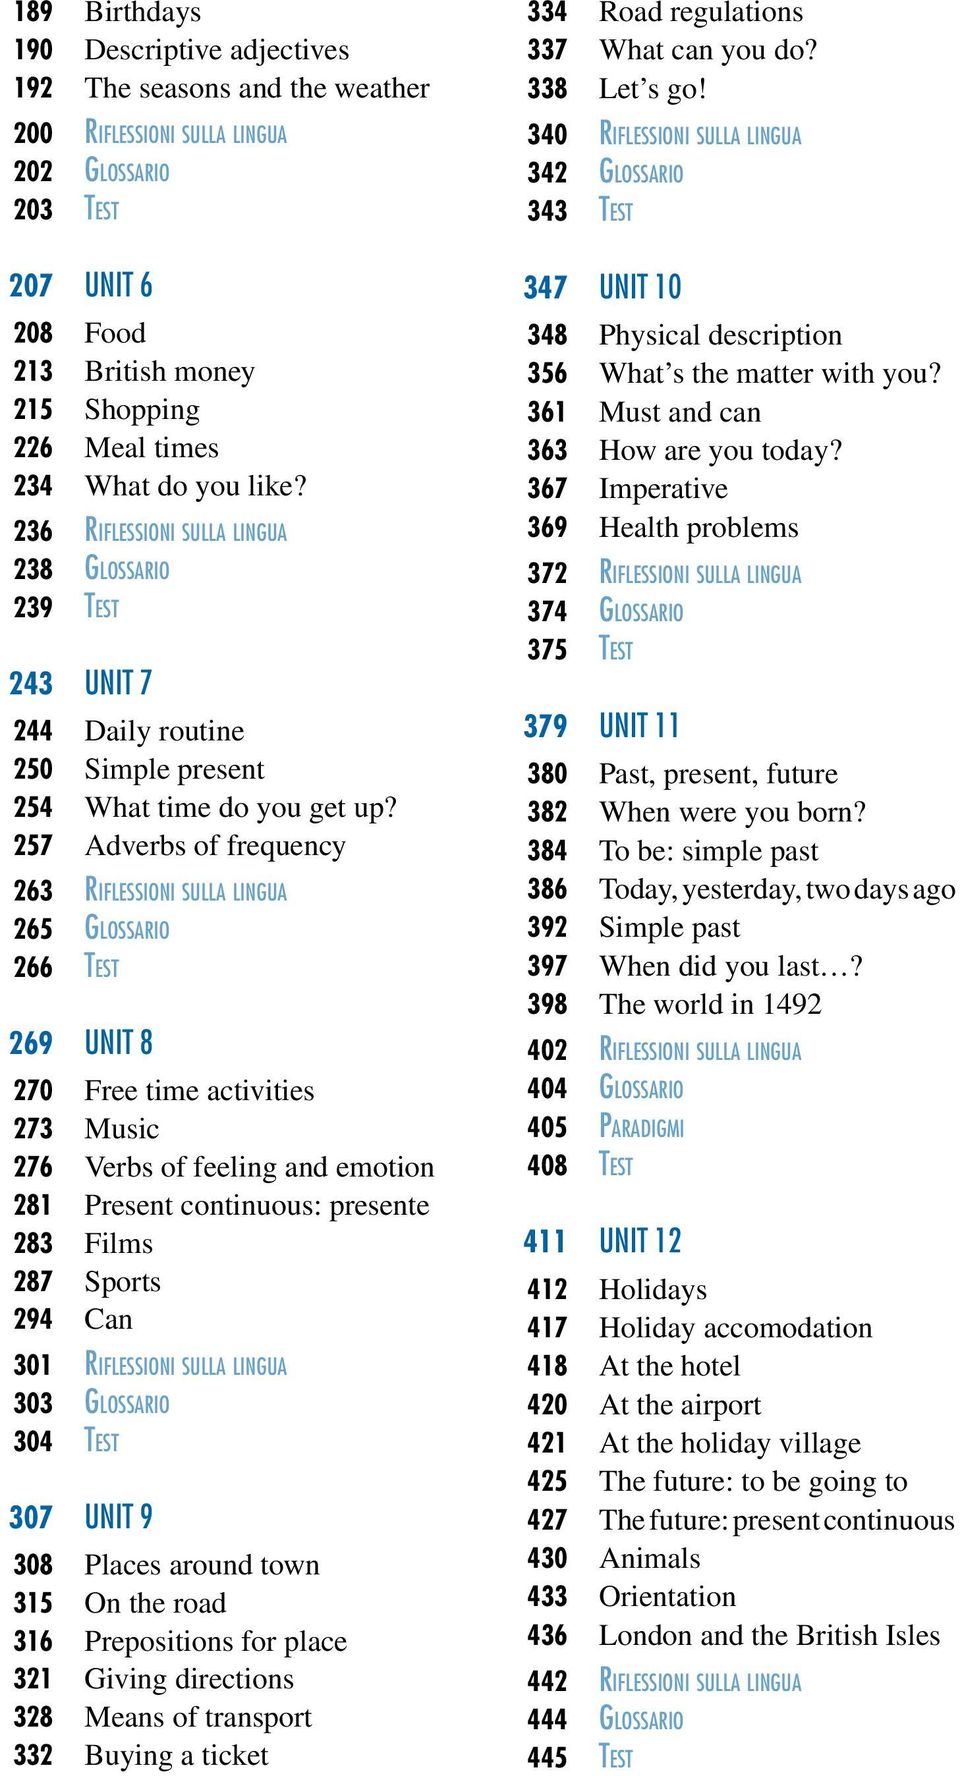 257 Adverbs of frequency 263 Riflessioni sulla lingua 265 Glossario 266 Test 269 Unit 8 270 Free time activities 273 Music 276 Verbs of feeling and emotion 281 Present continuous: presente 283 Films